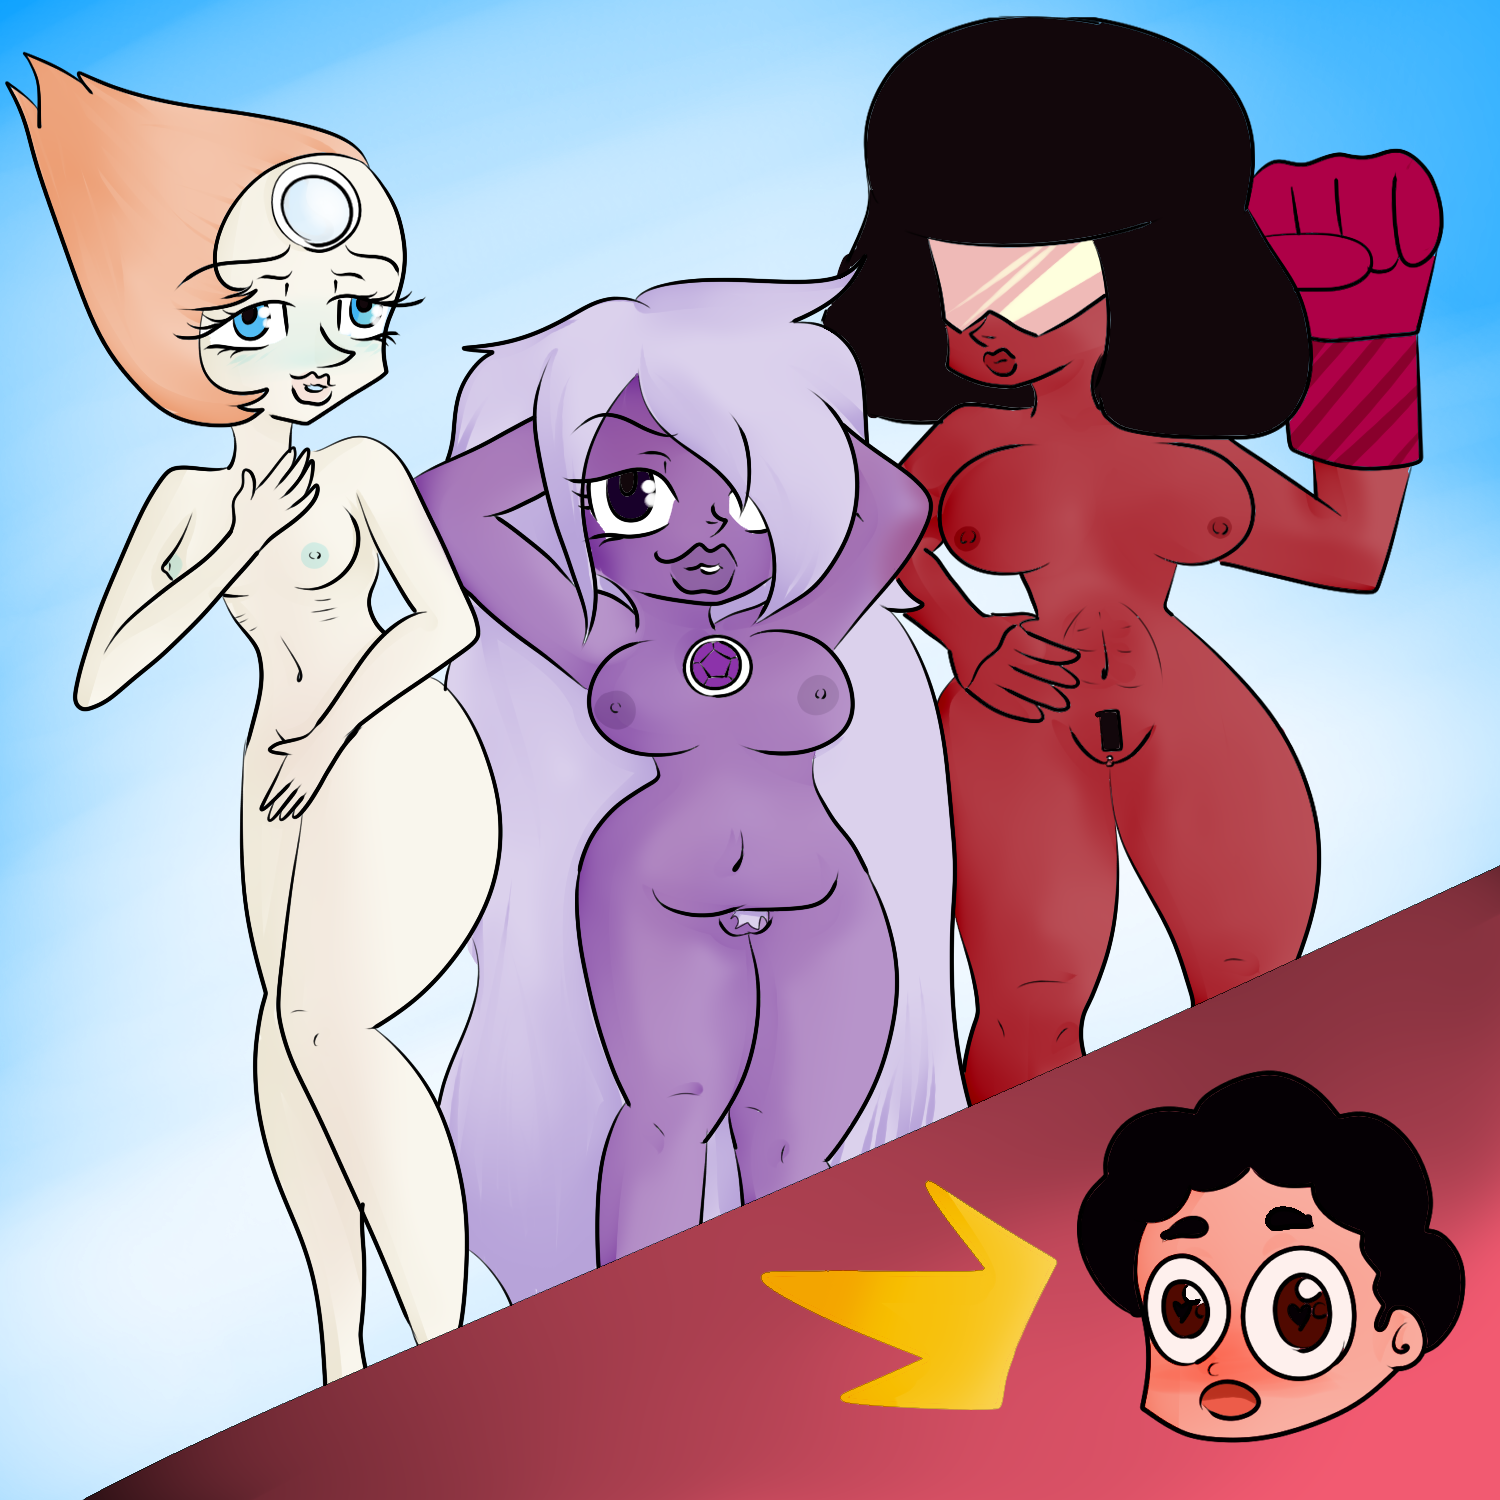 amethyst pearl or garnet which one will steven choose if they are all hot a...